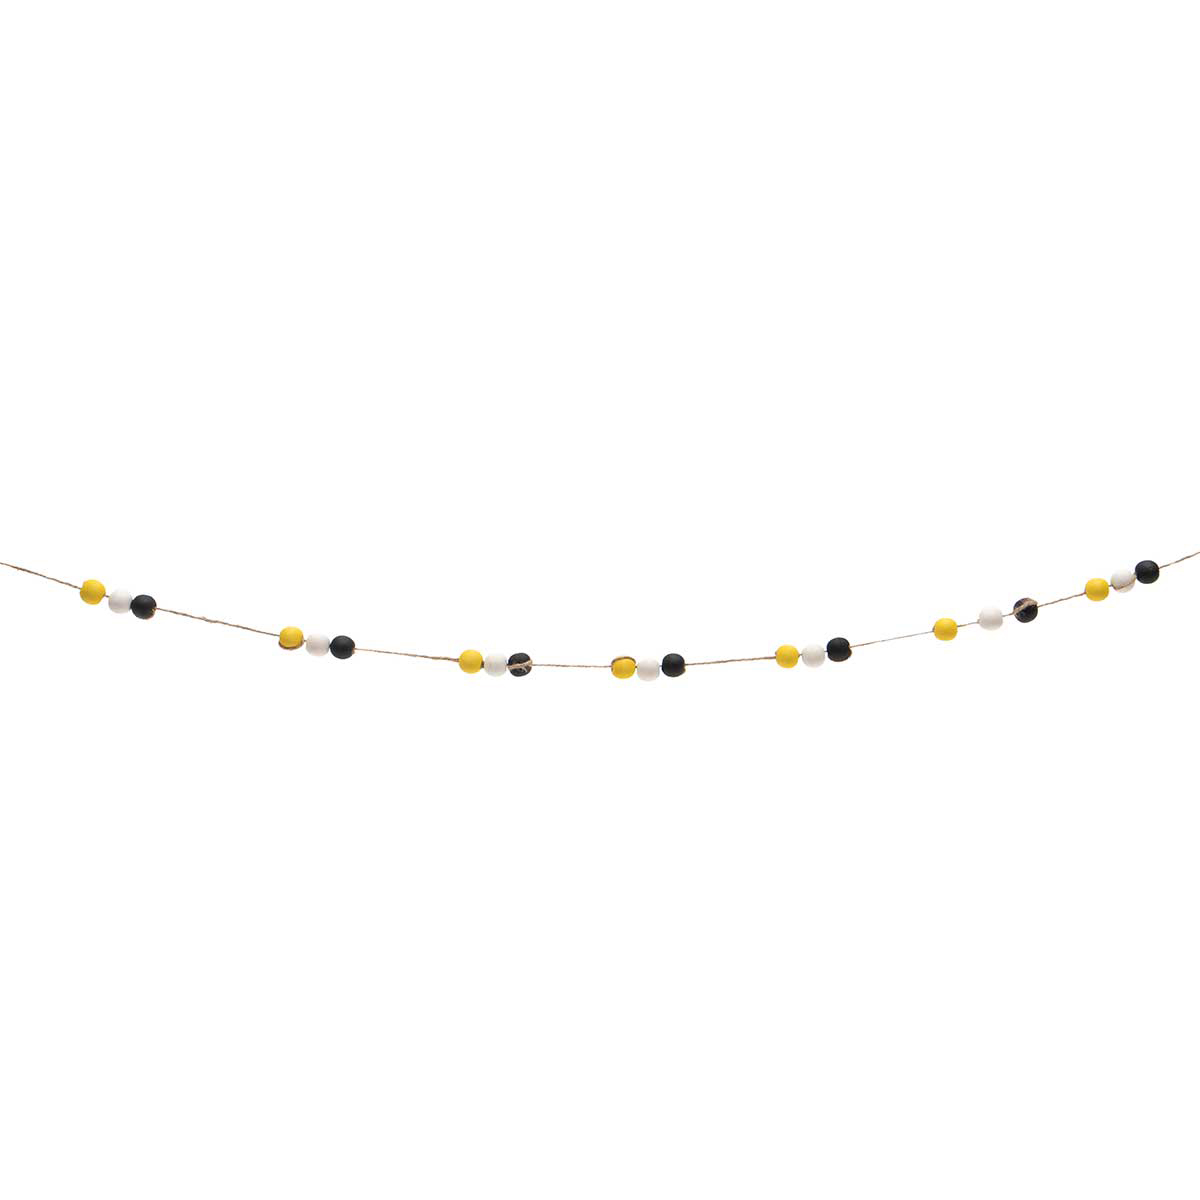 b50 Garland with Twine Hanger and 39 Beads